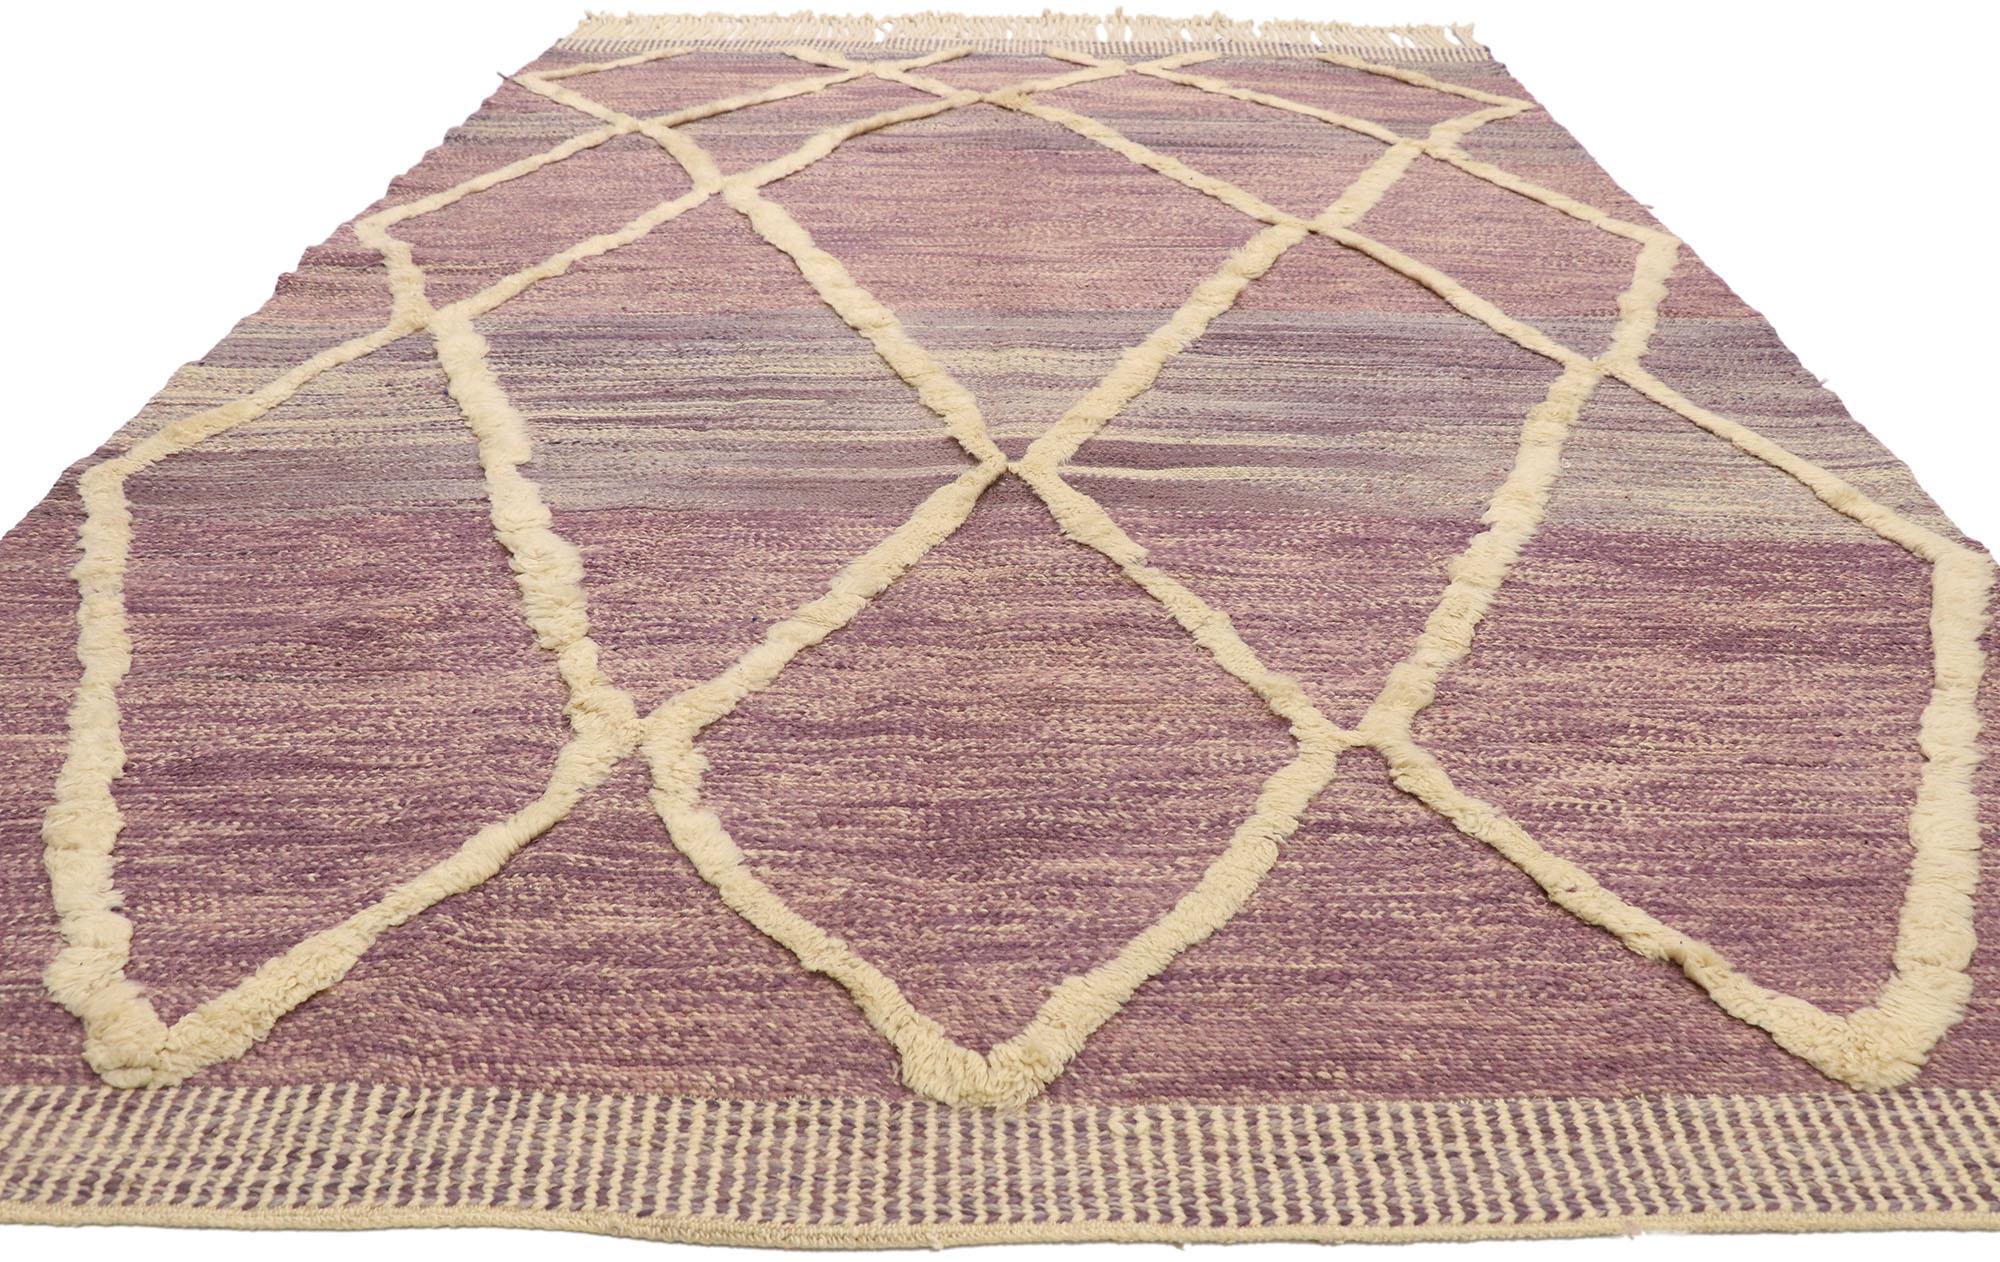 rug with raised pattern